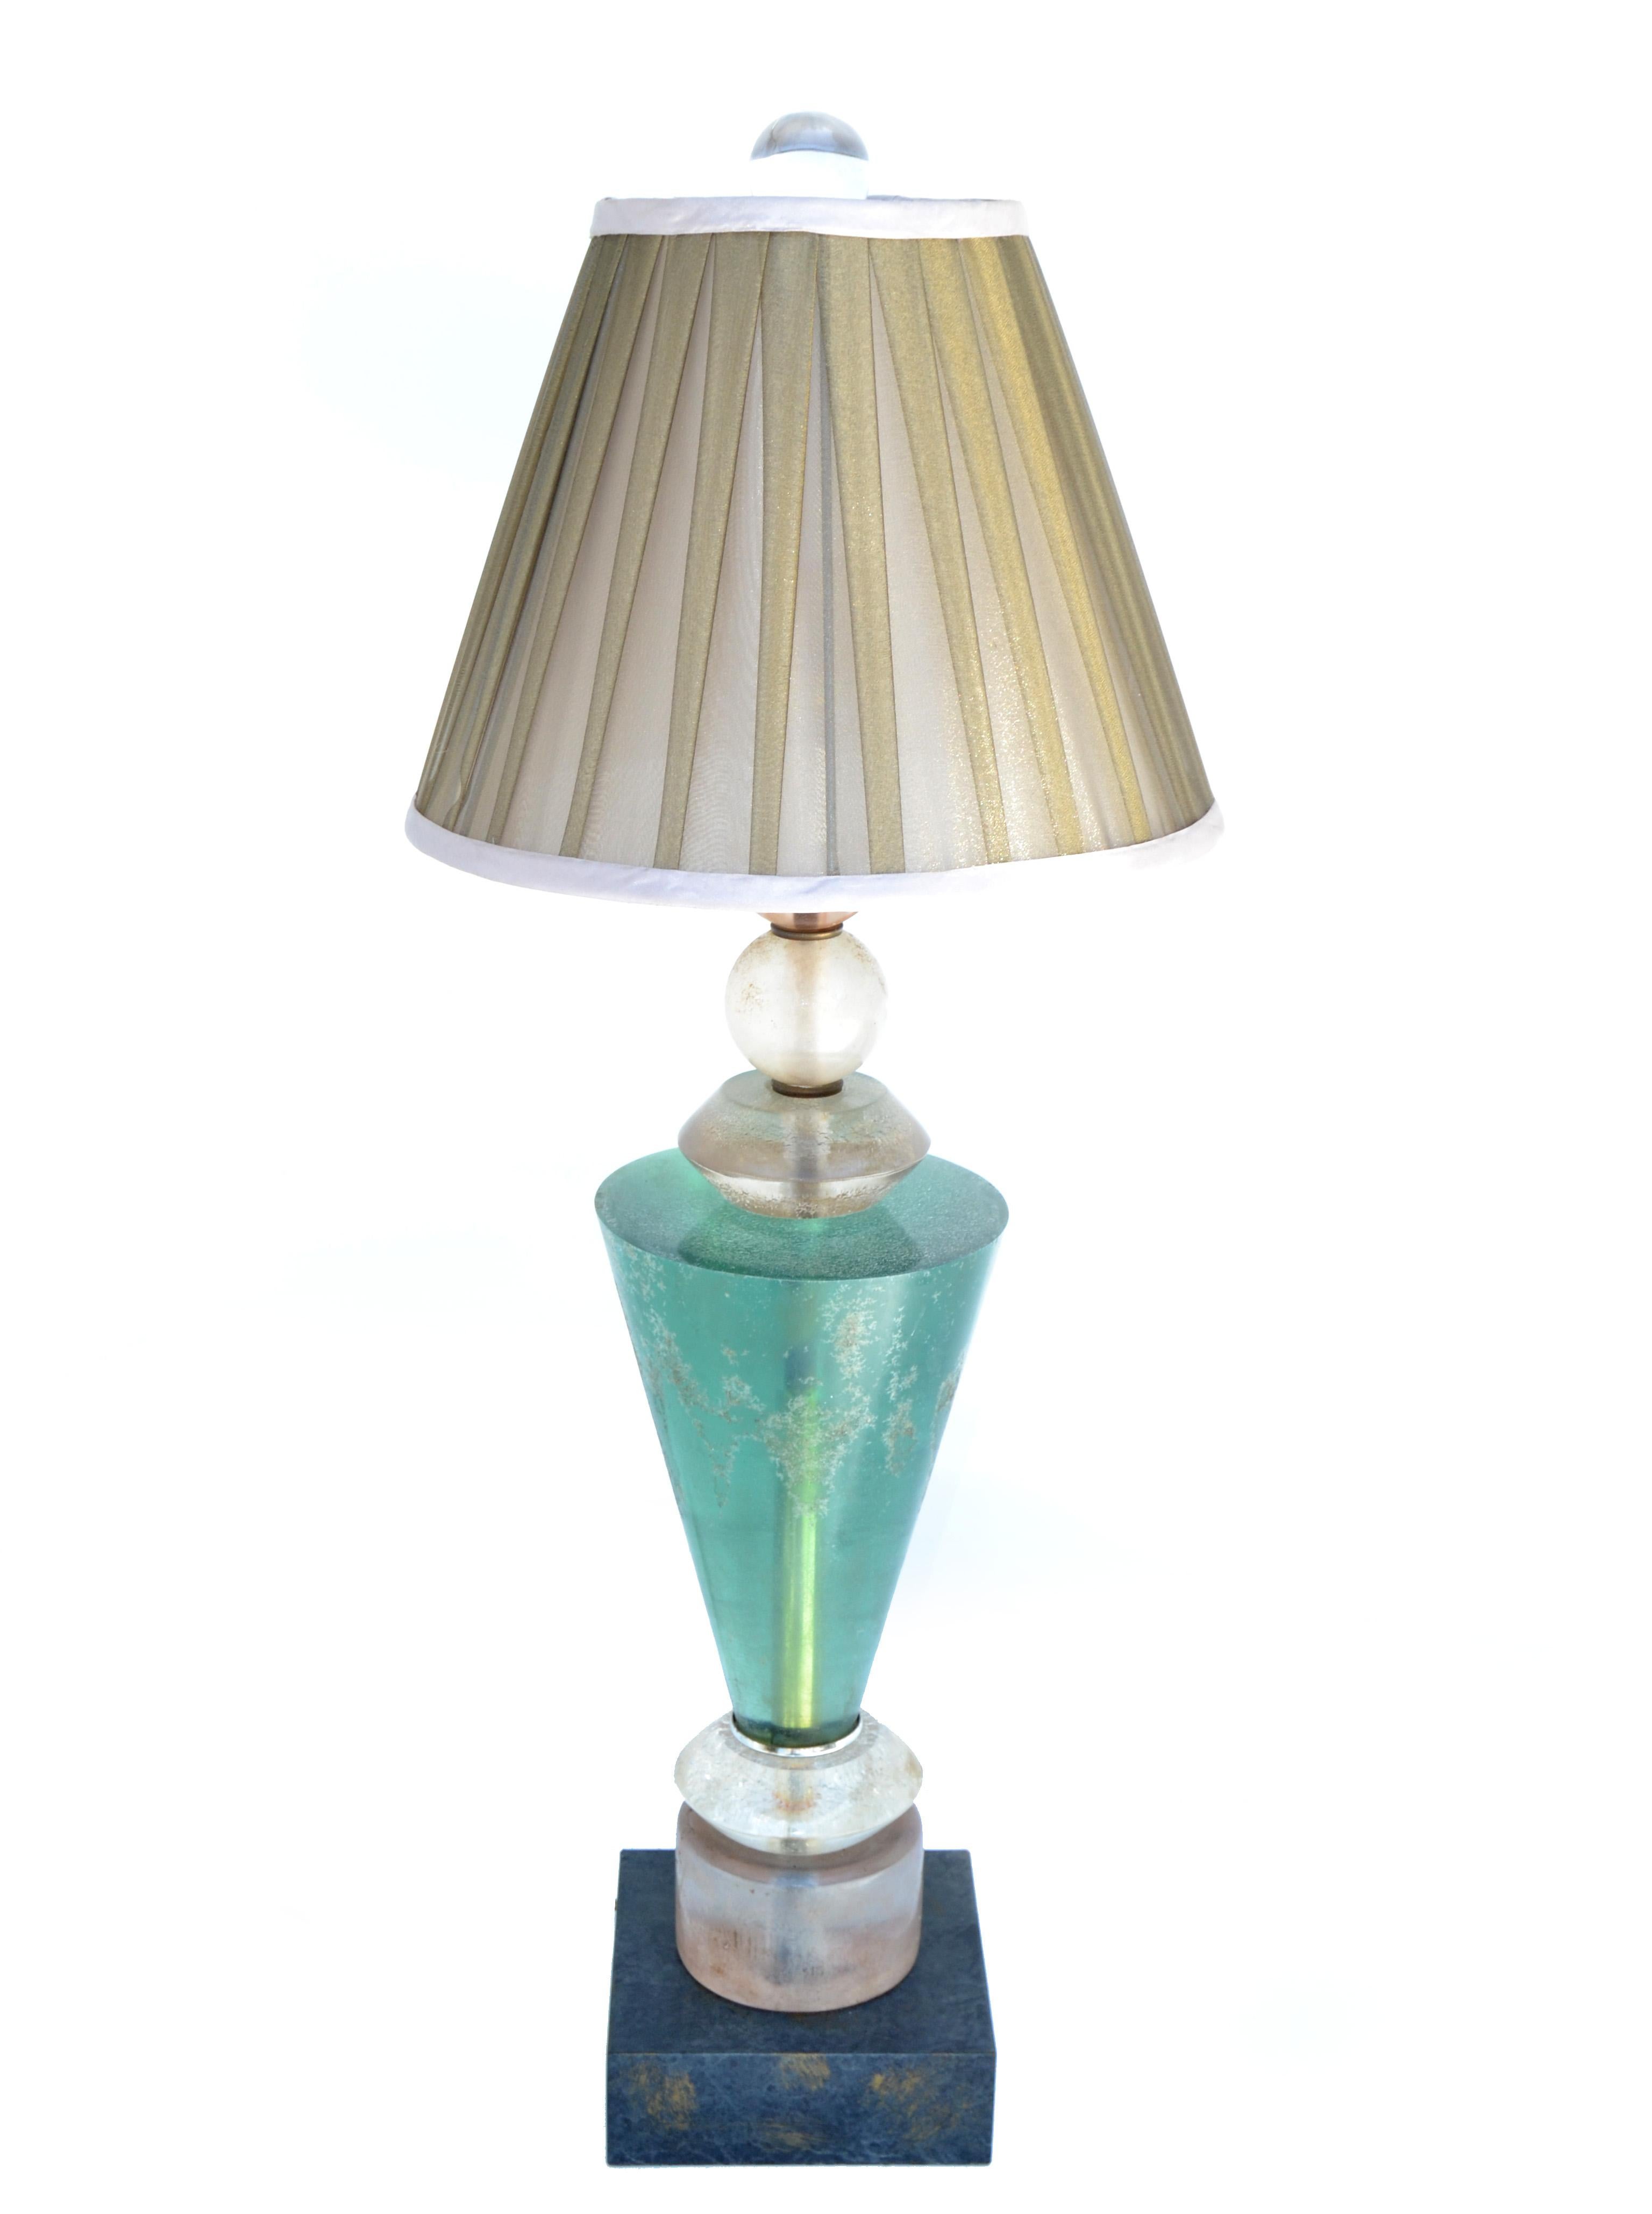 Van Teal Mid-Century Modern Green, Black & Gold Lucite Table Lamp Pleated Shade In Good Condition For Sale In Miami, FL